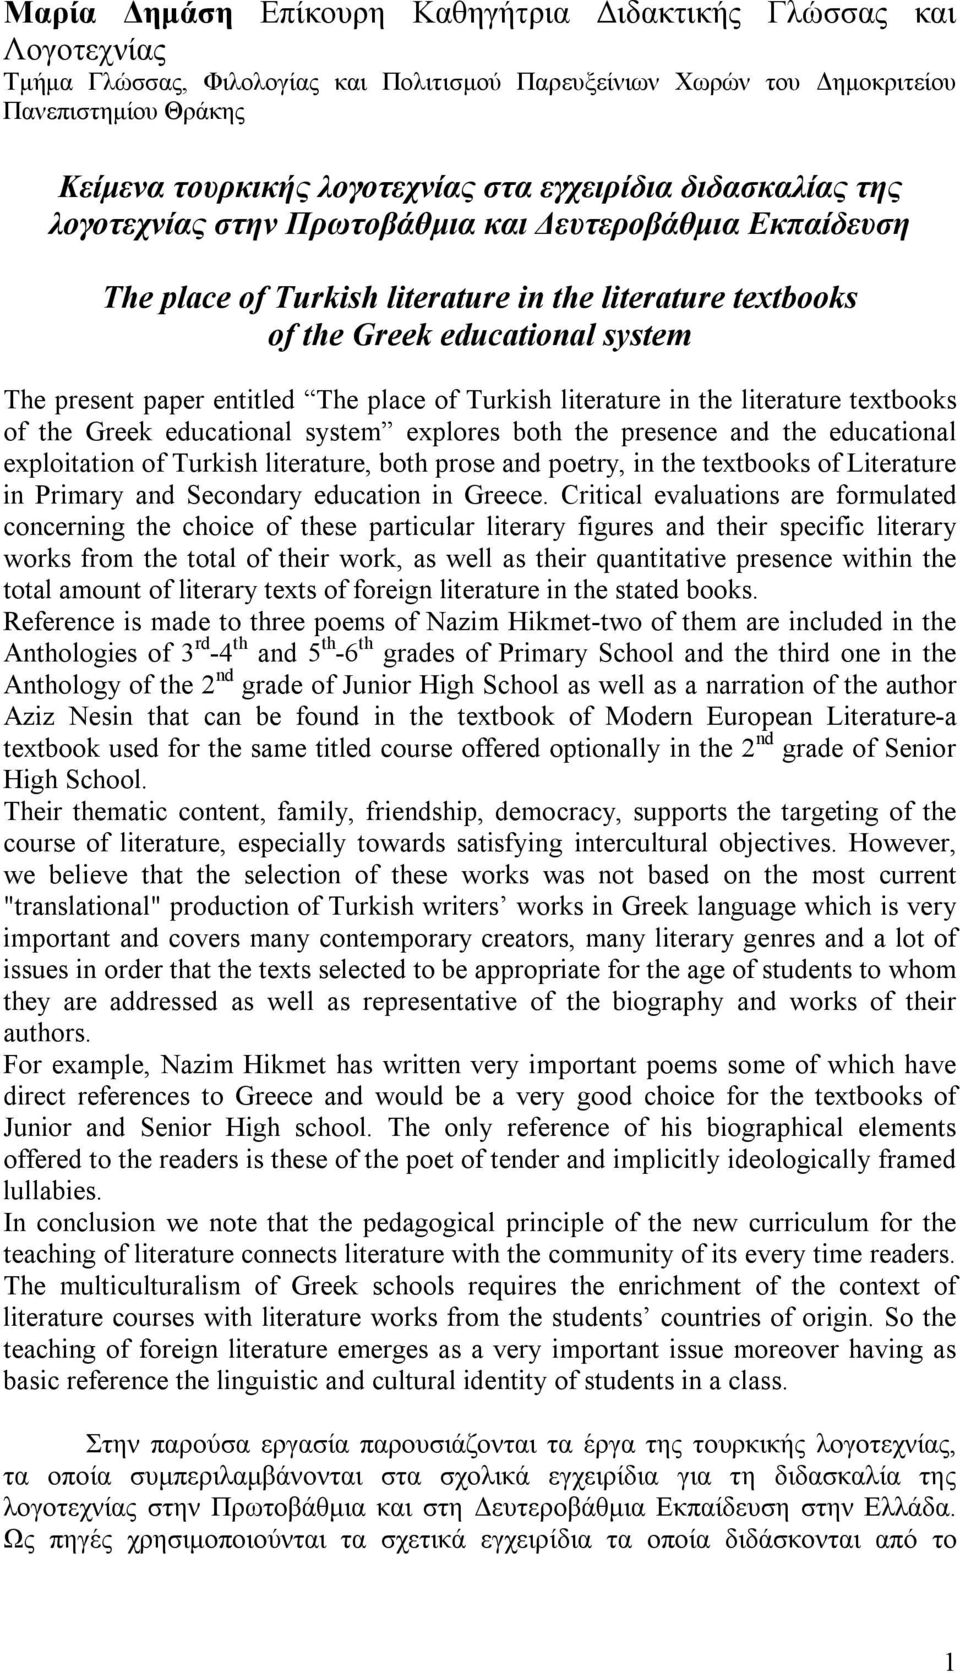 entitled The place of Turkish literature in the literature textbooks of the Greek educational system explores both the presence and the educational exploitation of Turkish literature, both prose and